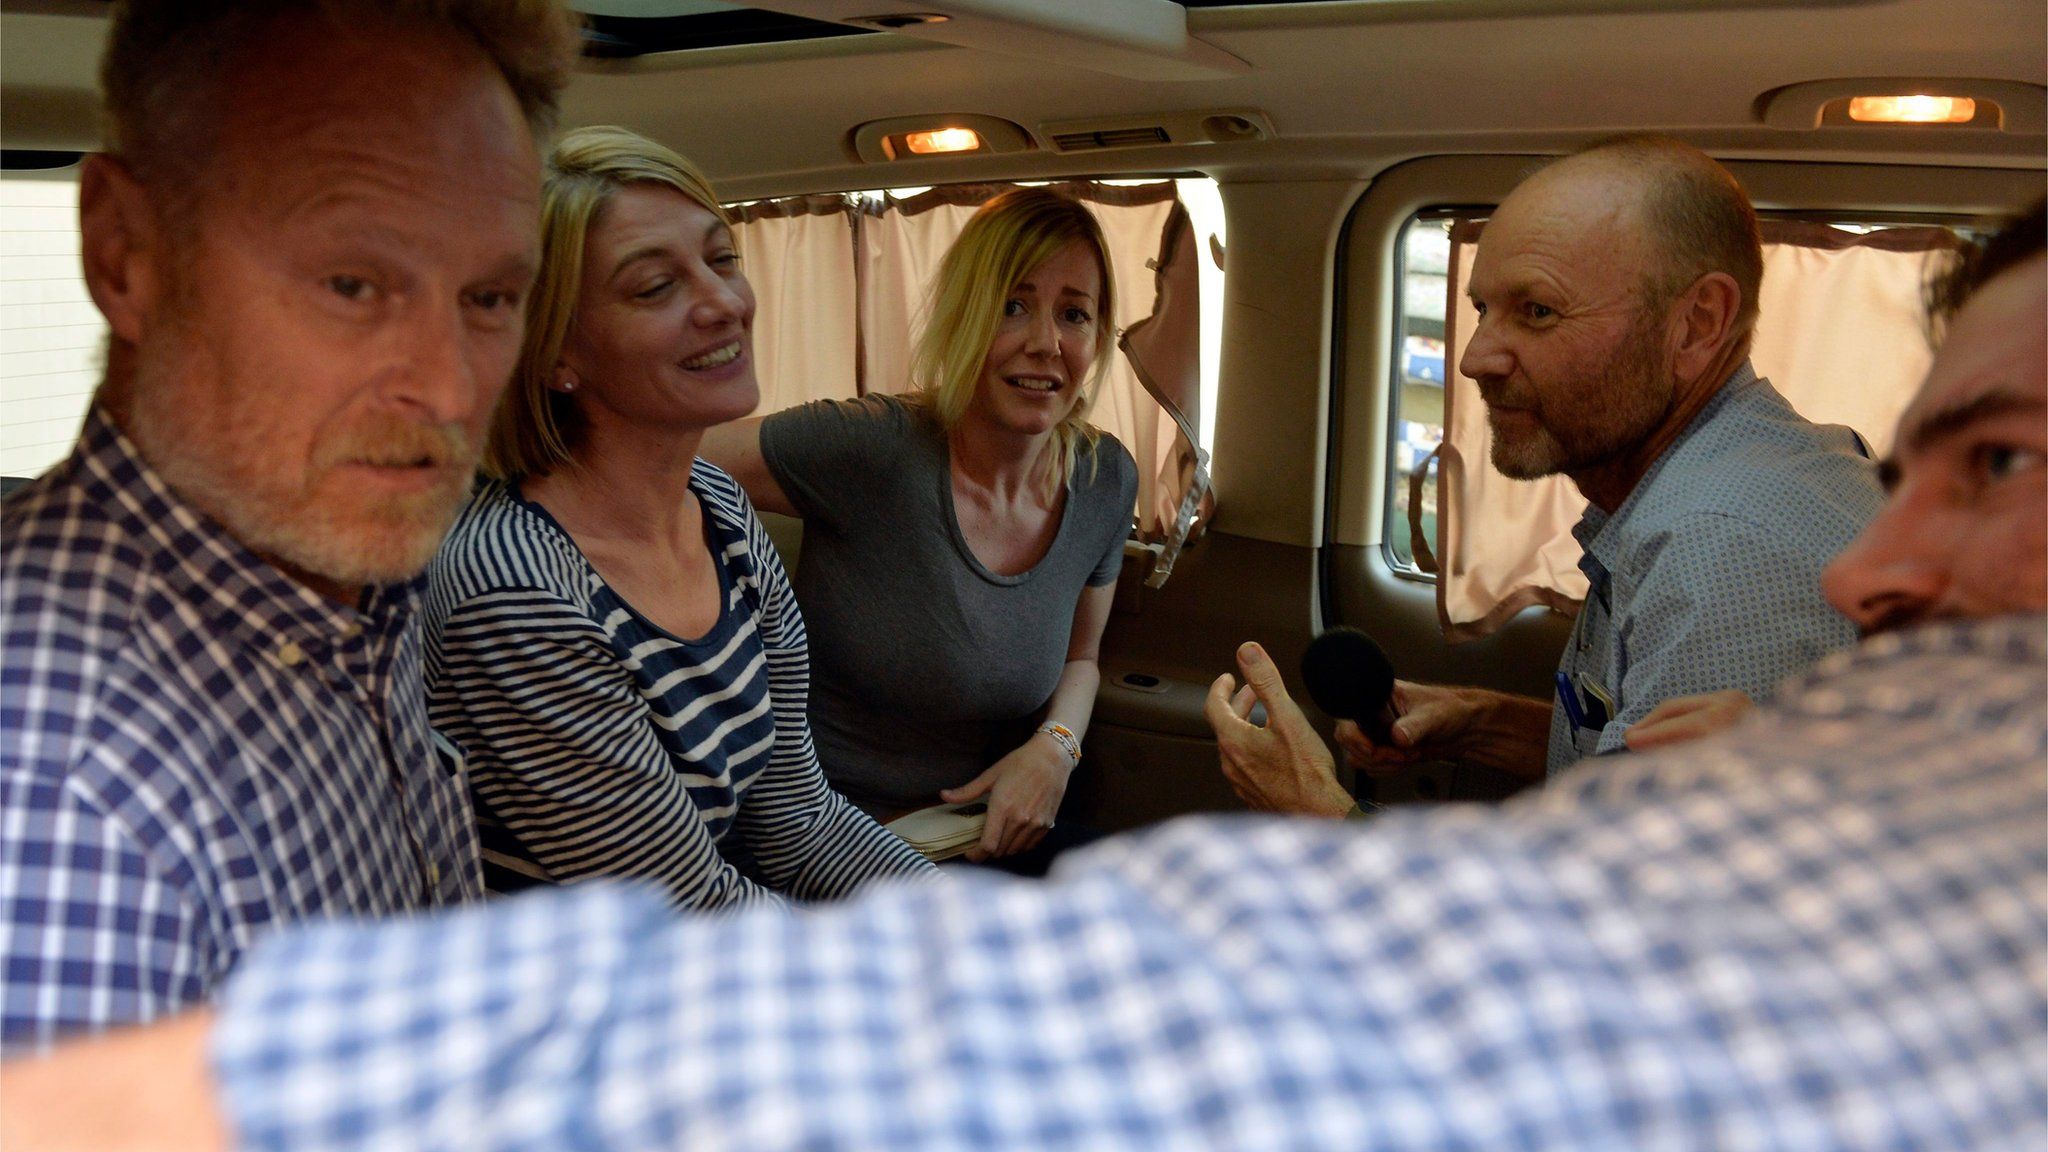 Members of Australian Channel Nine TV crew and Sally Faulkner (centre) sit inside a minivan after their release on bail in Lebanon (20 April 2016)